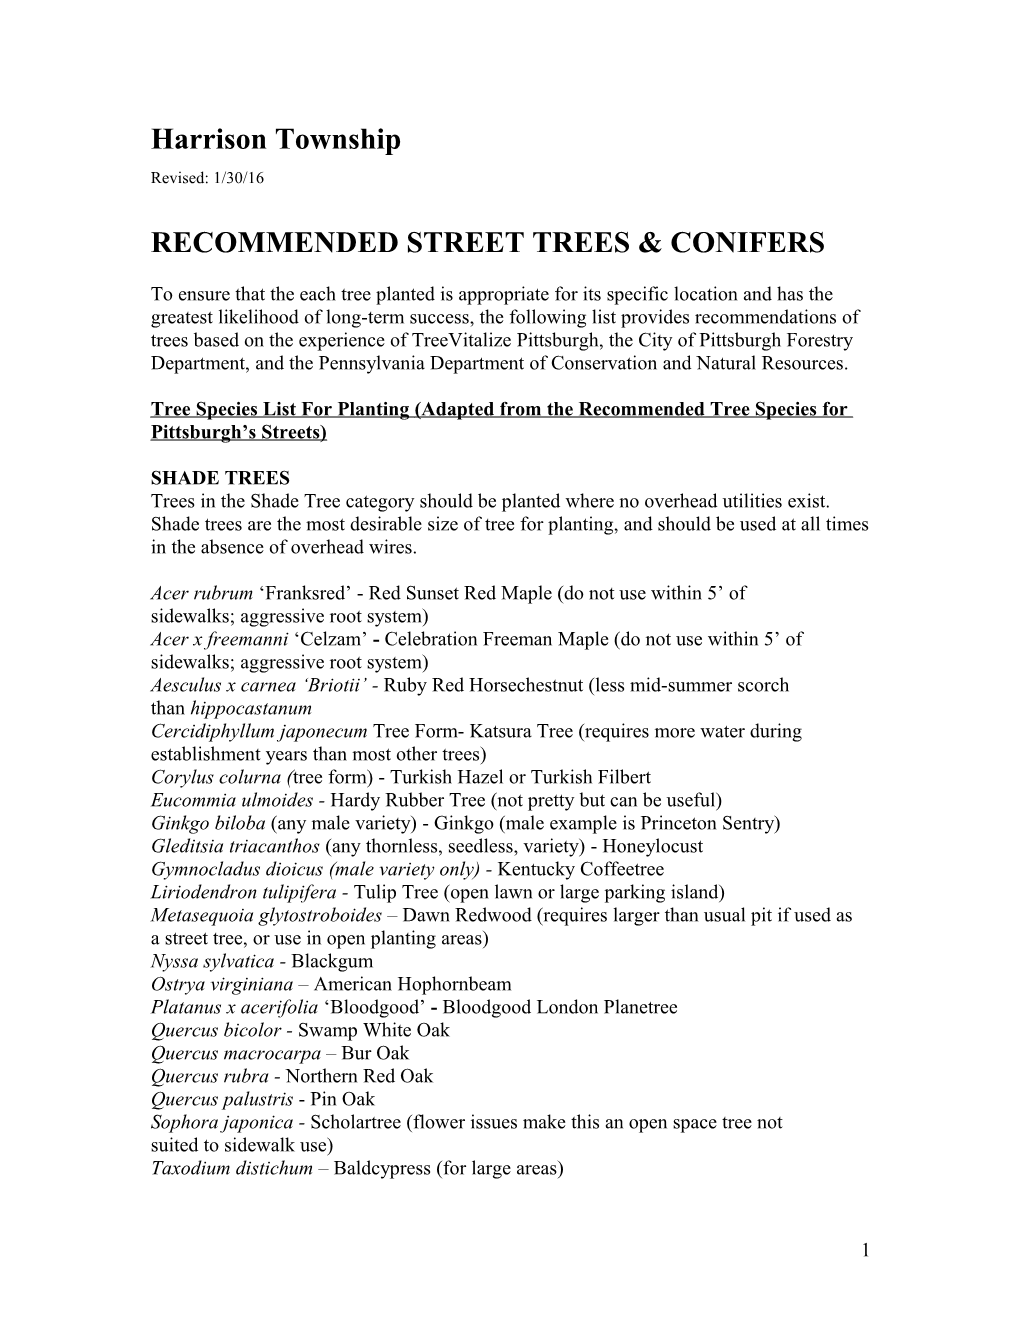 Recommended Street Trees & Conifers